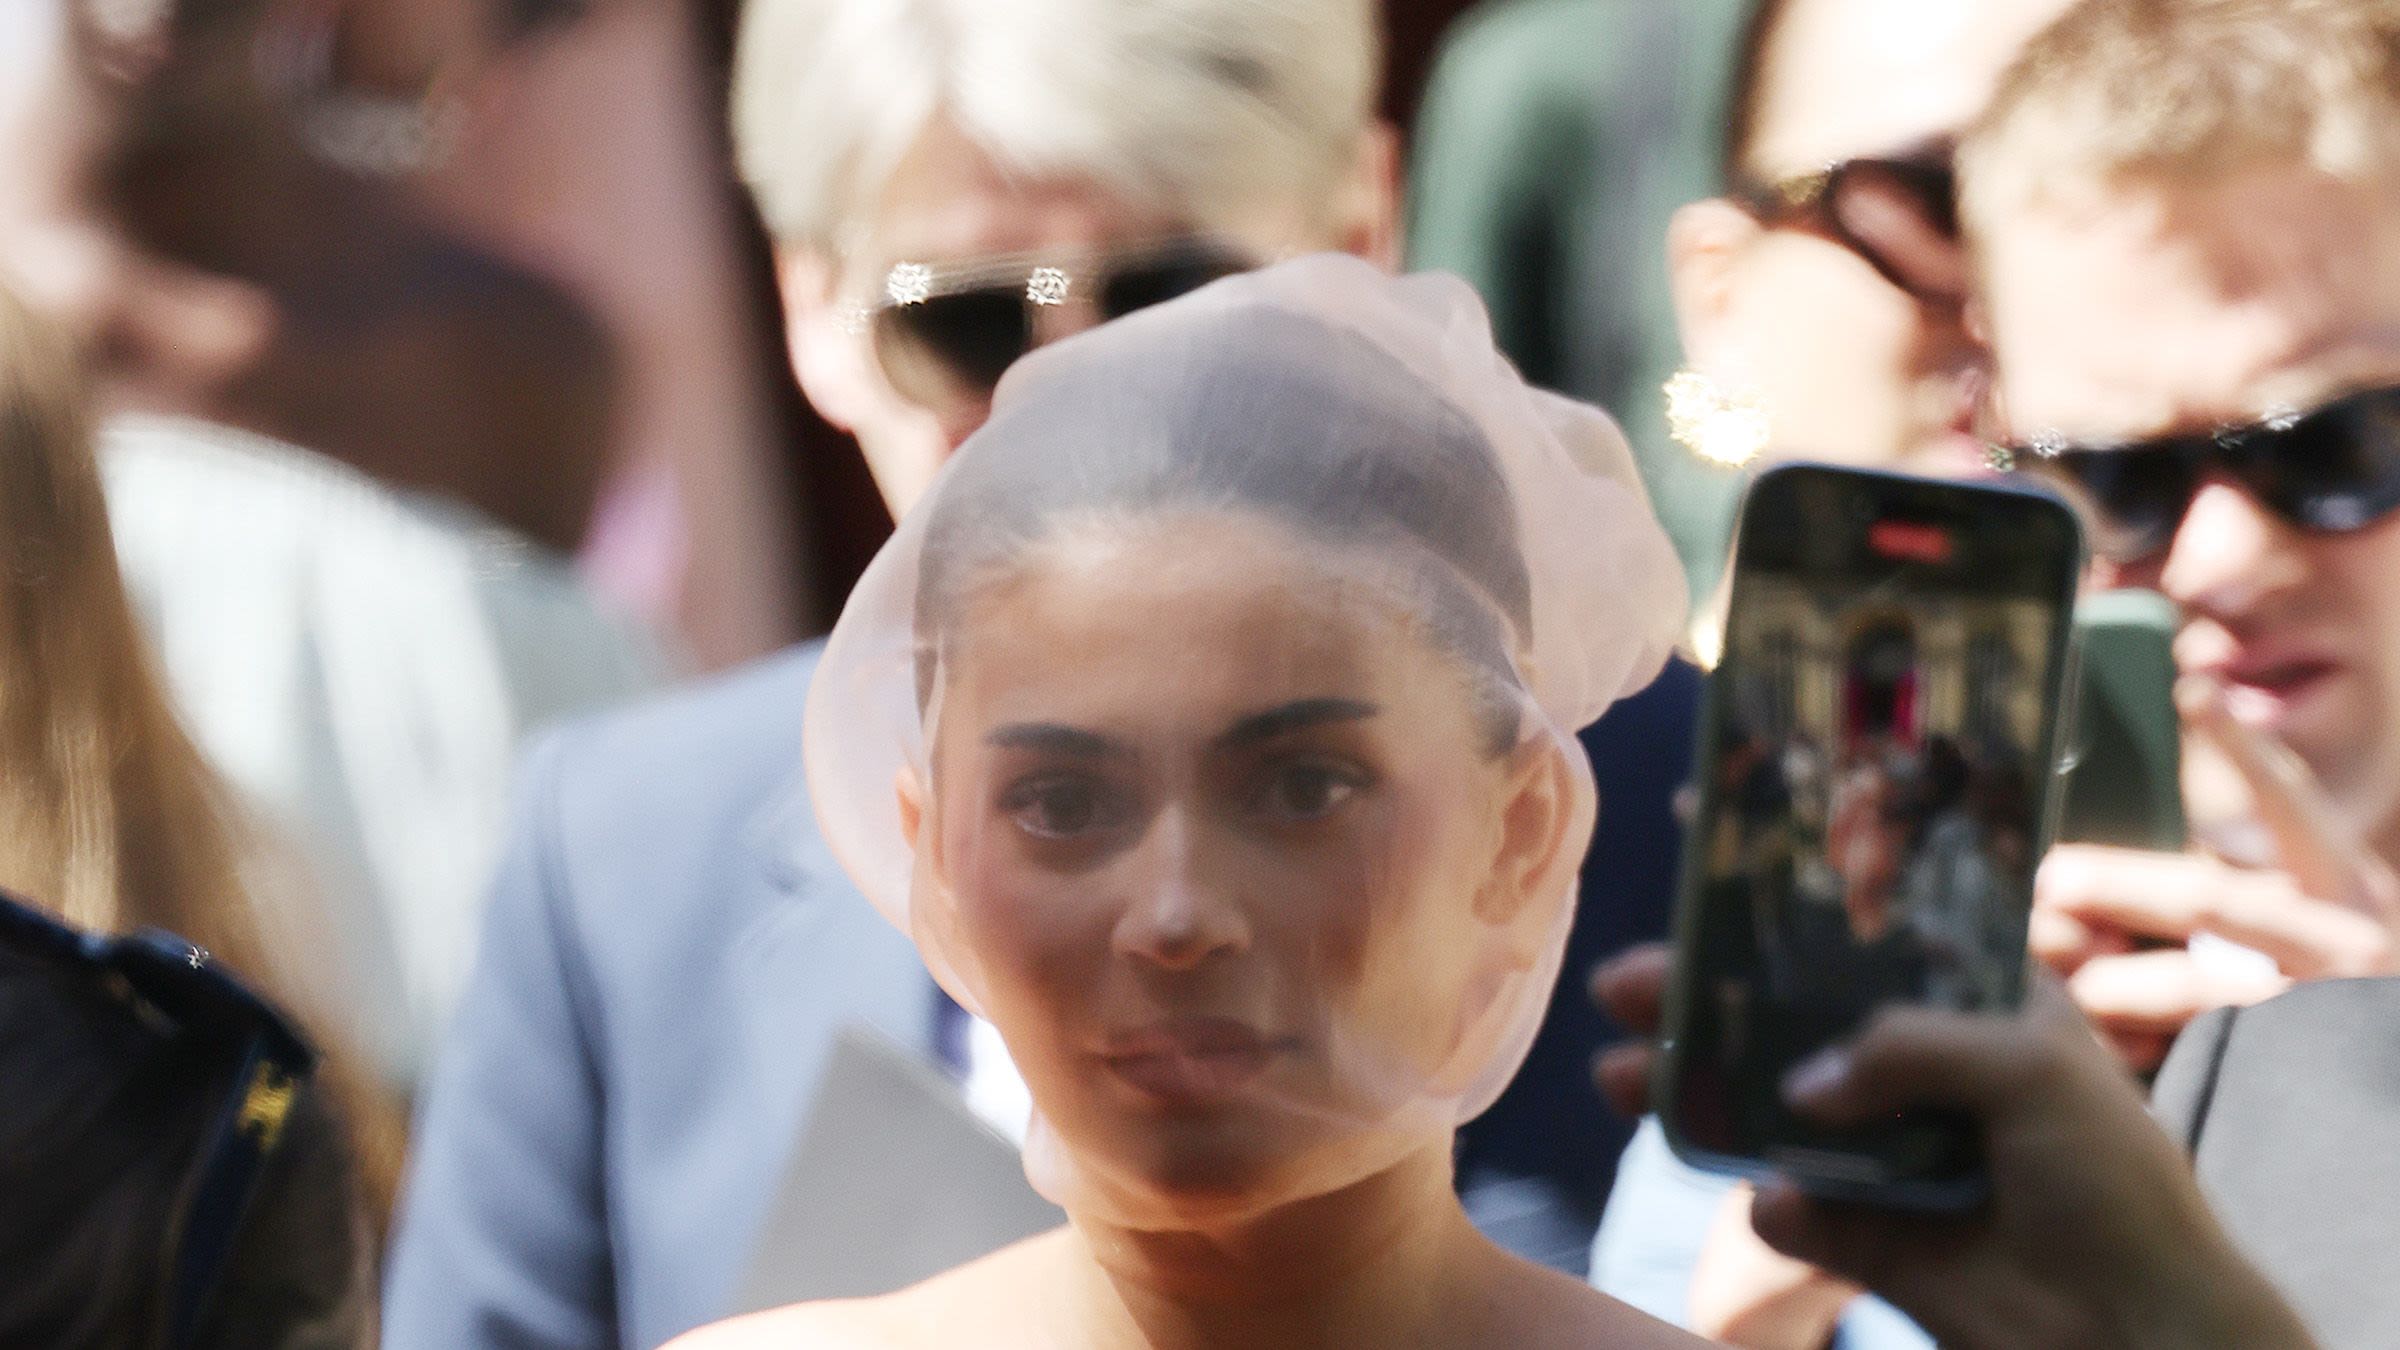 Kylie Jenner Covers Face During Return to Paris Fashion Week After Opening Up About Bullying